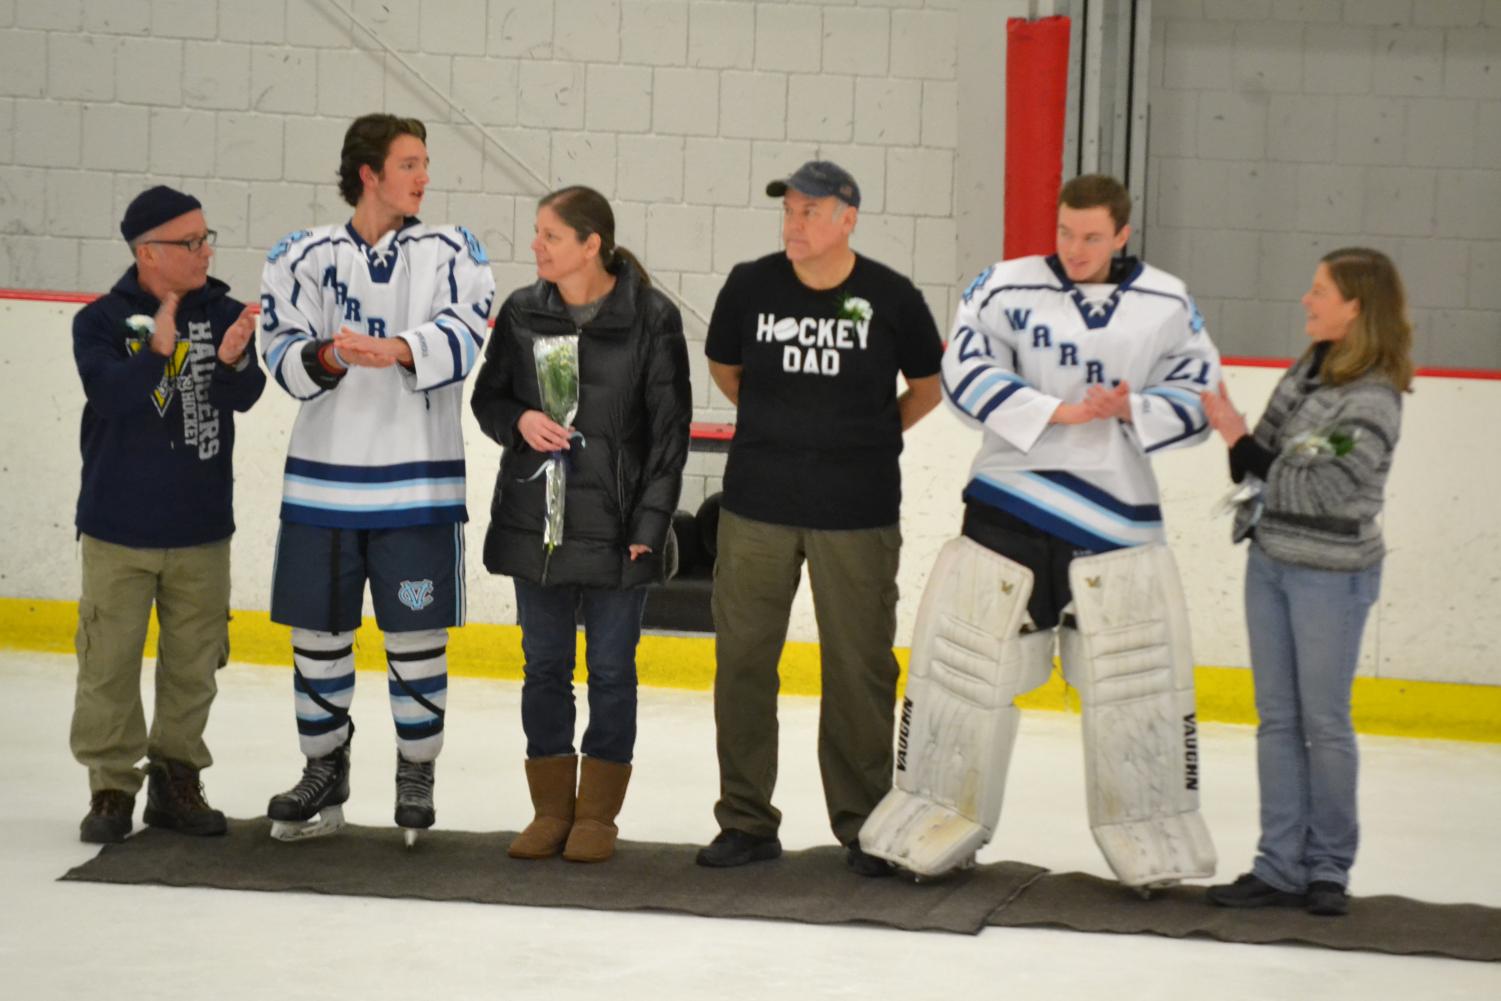 respectively, for their commitment as seniors to the hockey team